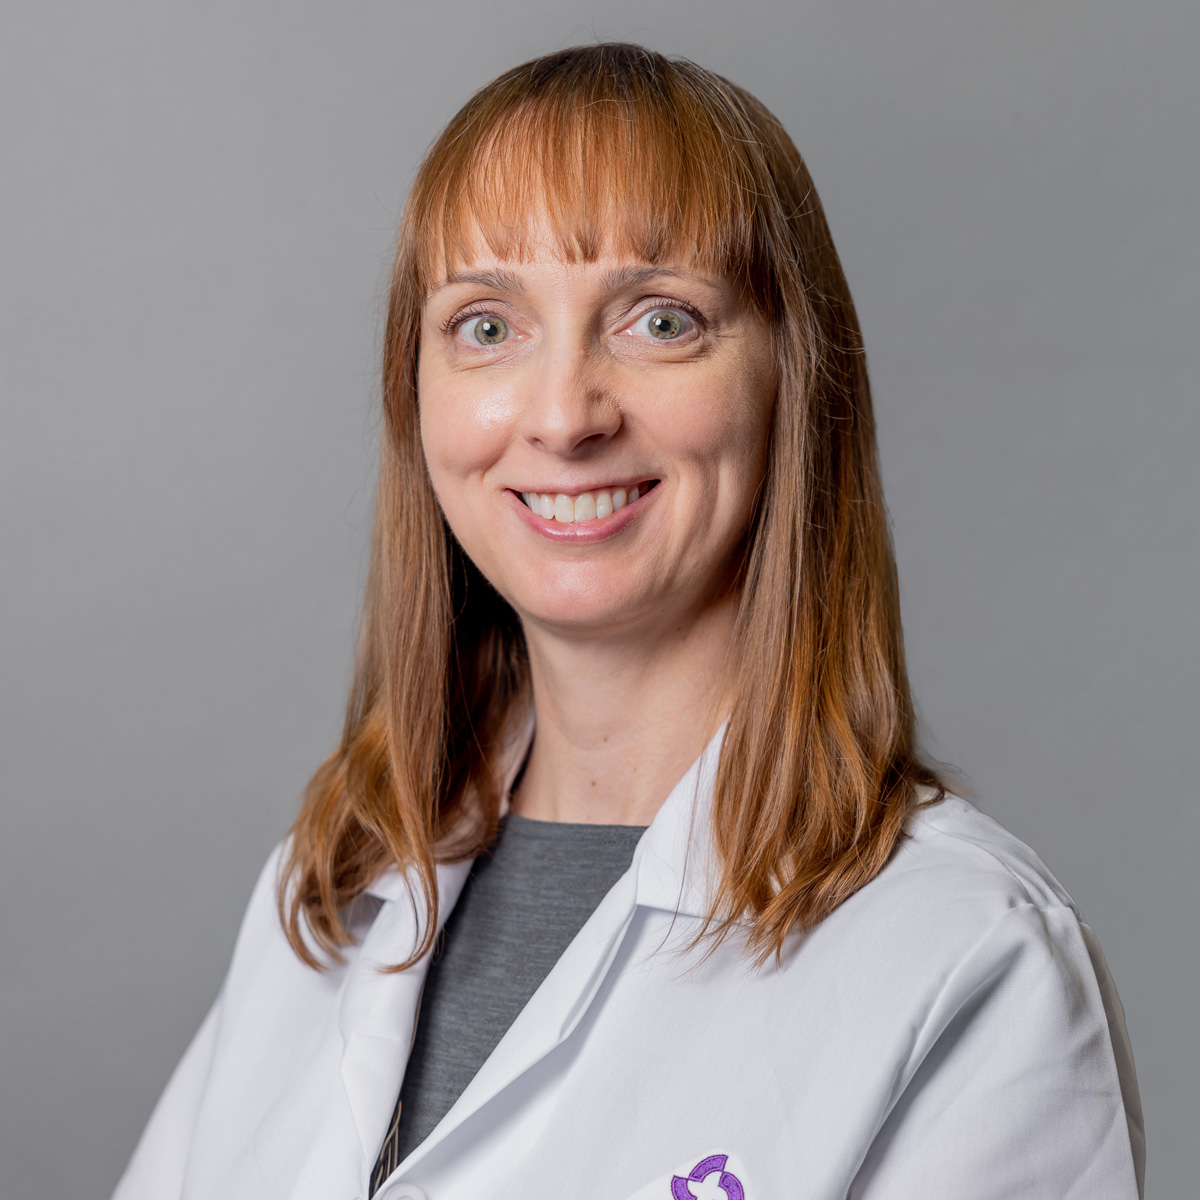 A friendly image of Aimee Popp MD